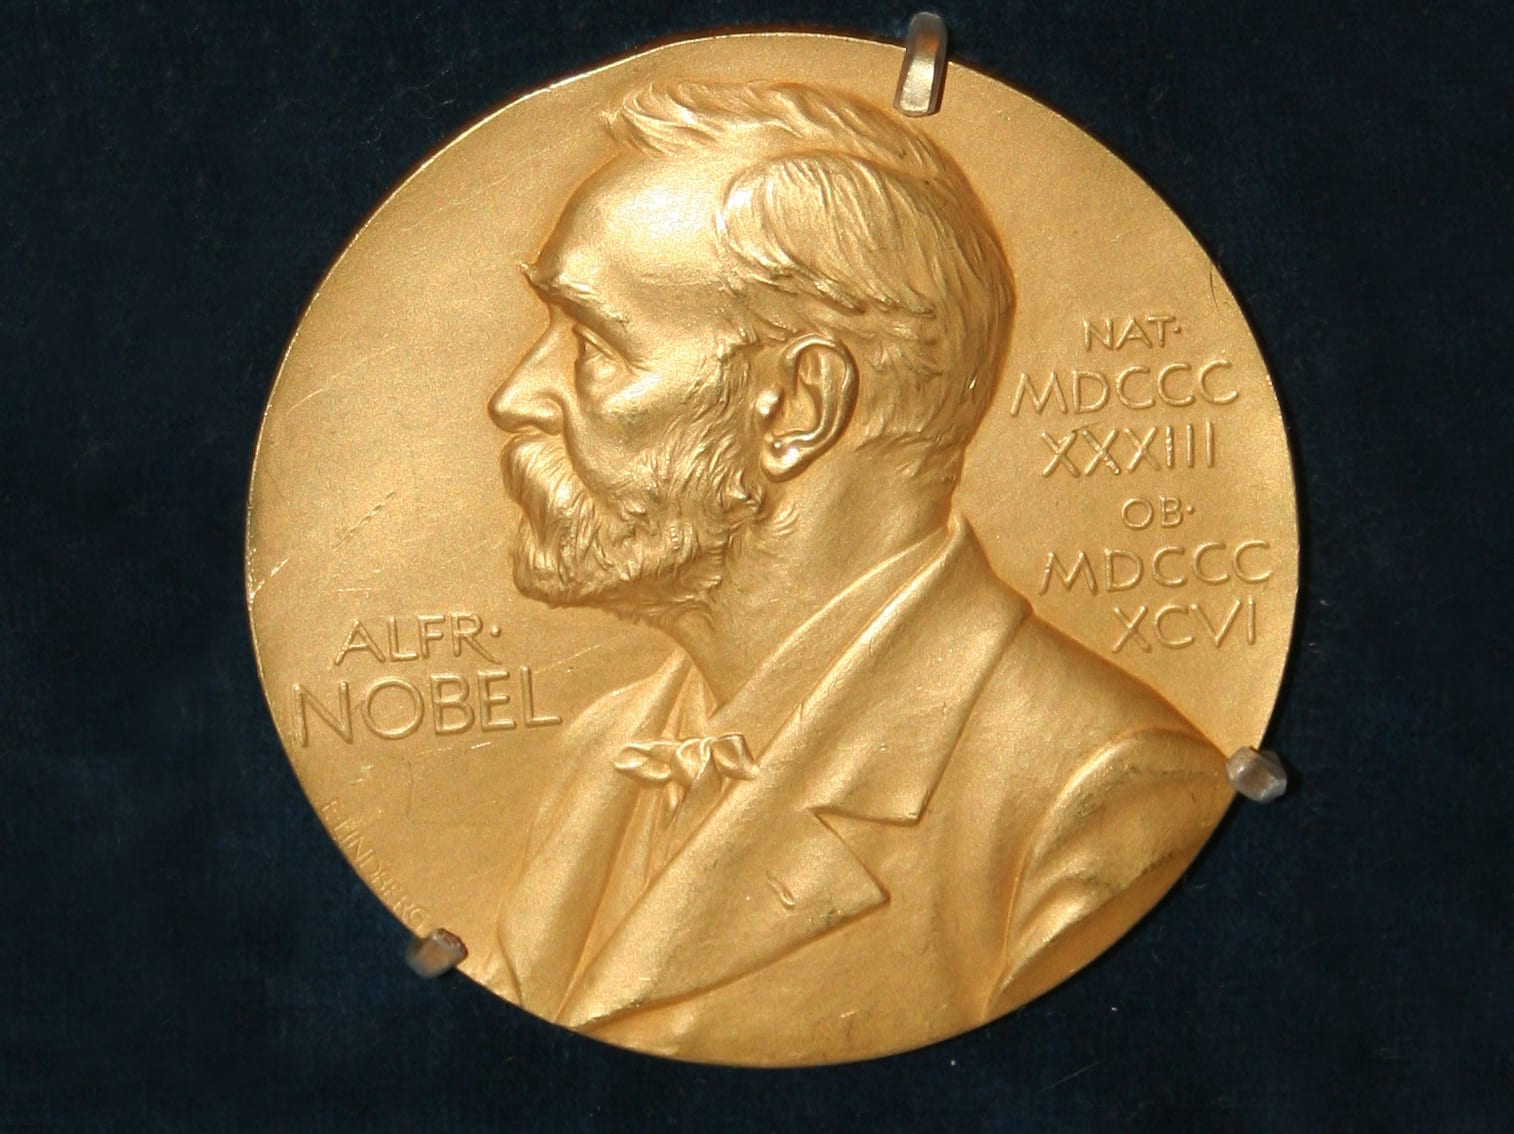 The Nobel Prize in Physiology or Medicine has been jointly awarded to James P. Allison and Tasuku Honjo “for their discovery of cancer therapy by inhibition of negative immune regulation